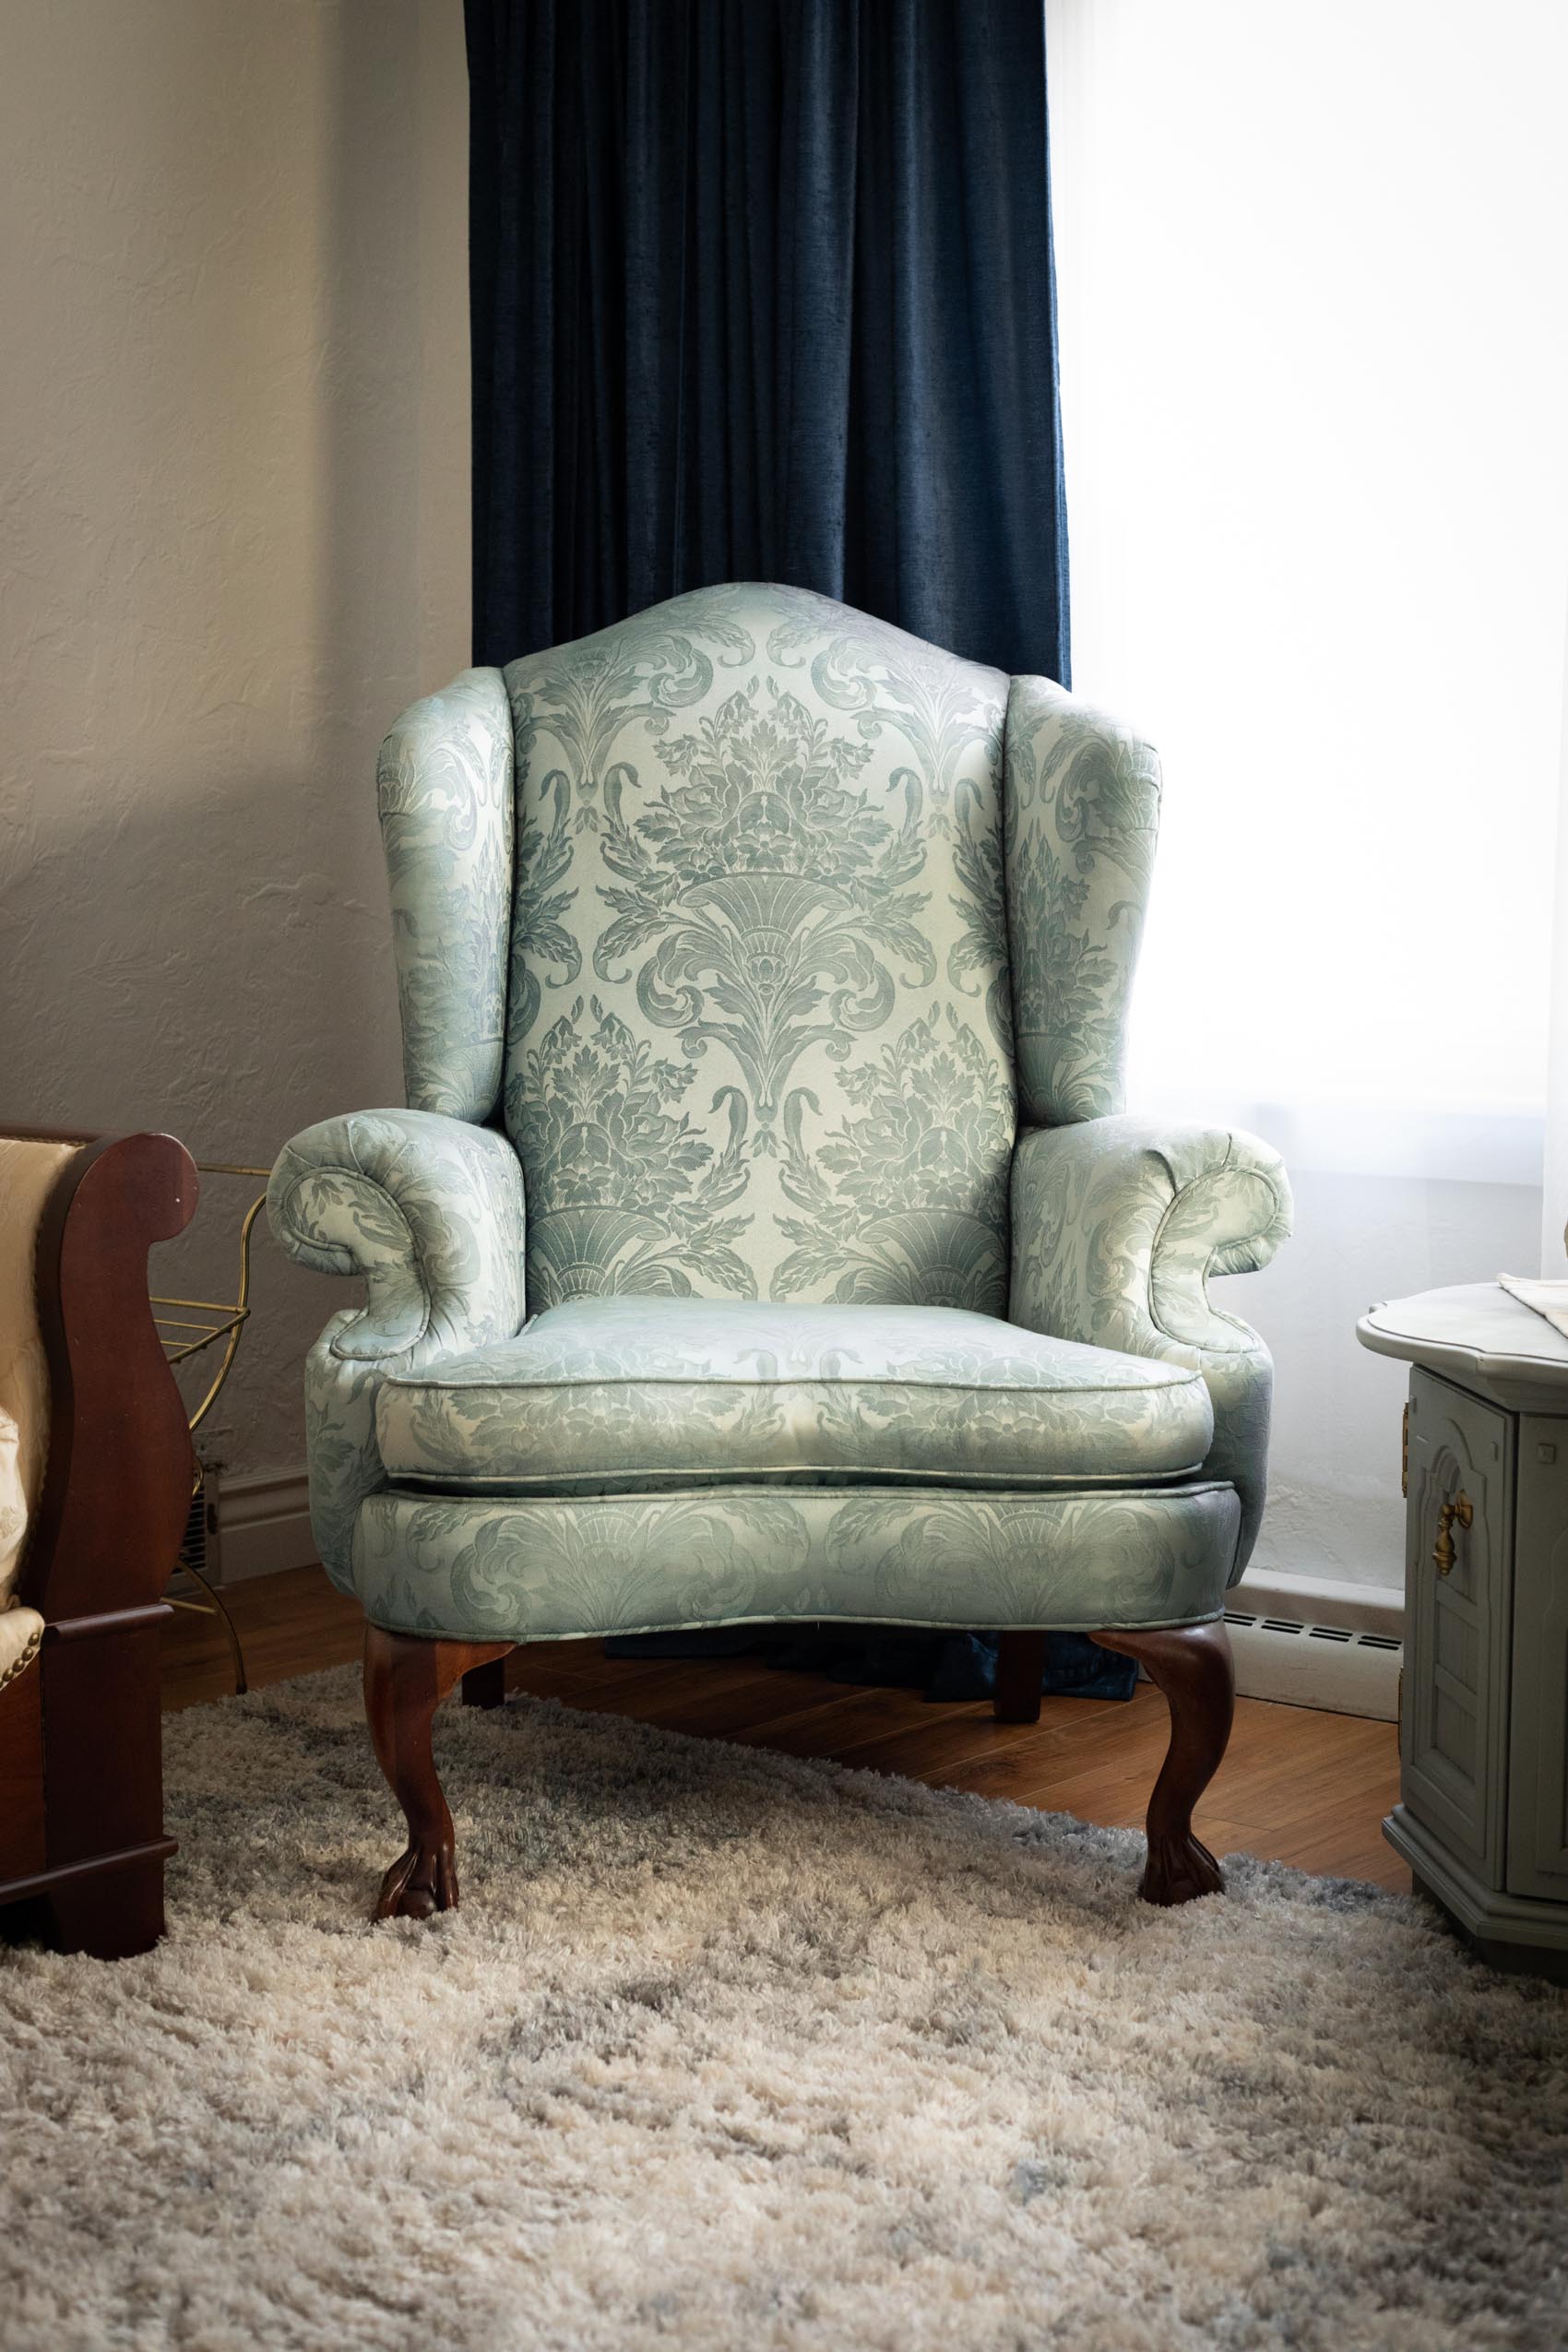 How To Dye A Fabric Chair Rit Tutorial Allyn Lewis - How To Dye Furniture Fabric